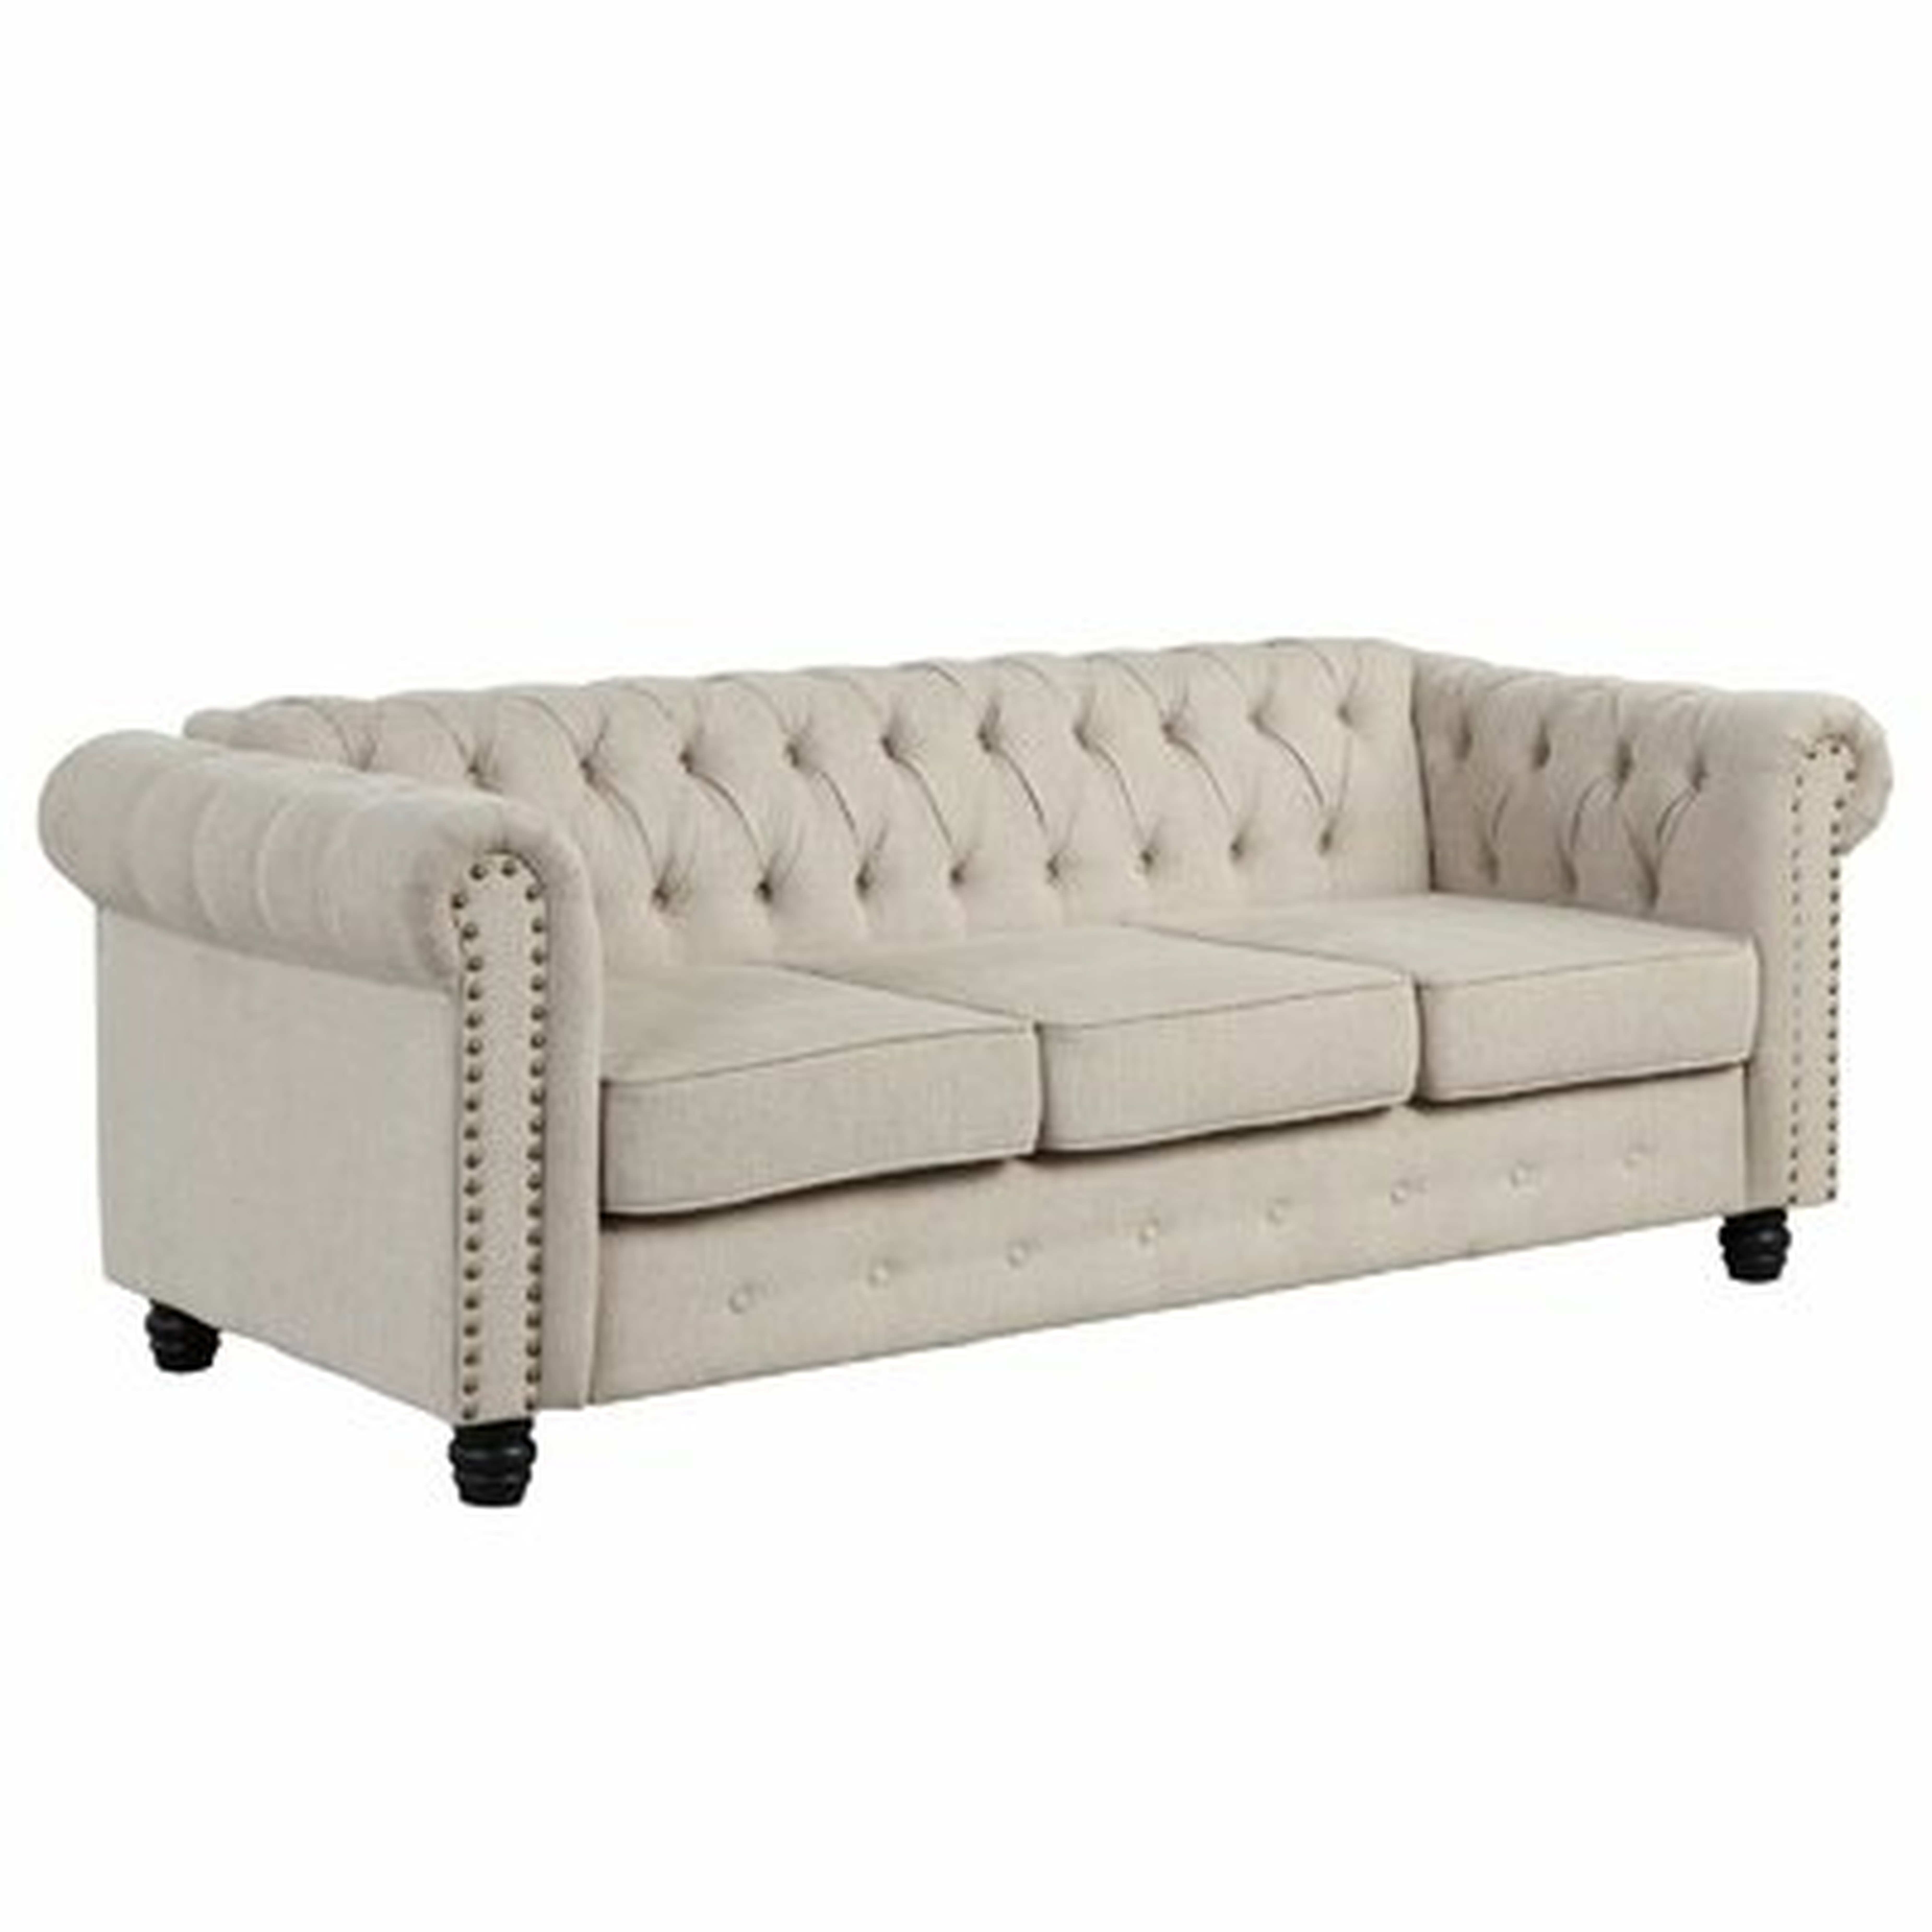 Gilles 82" Wide Rolled Arm Chesterfield Sofa - Wayfair